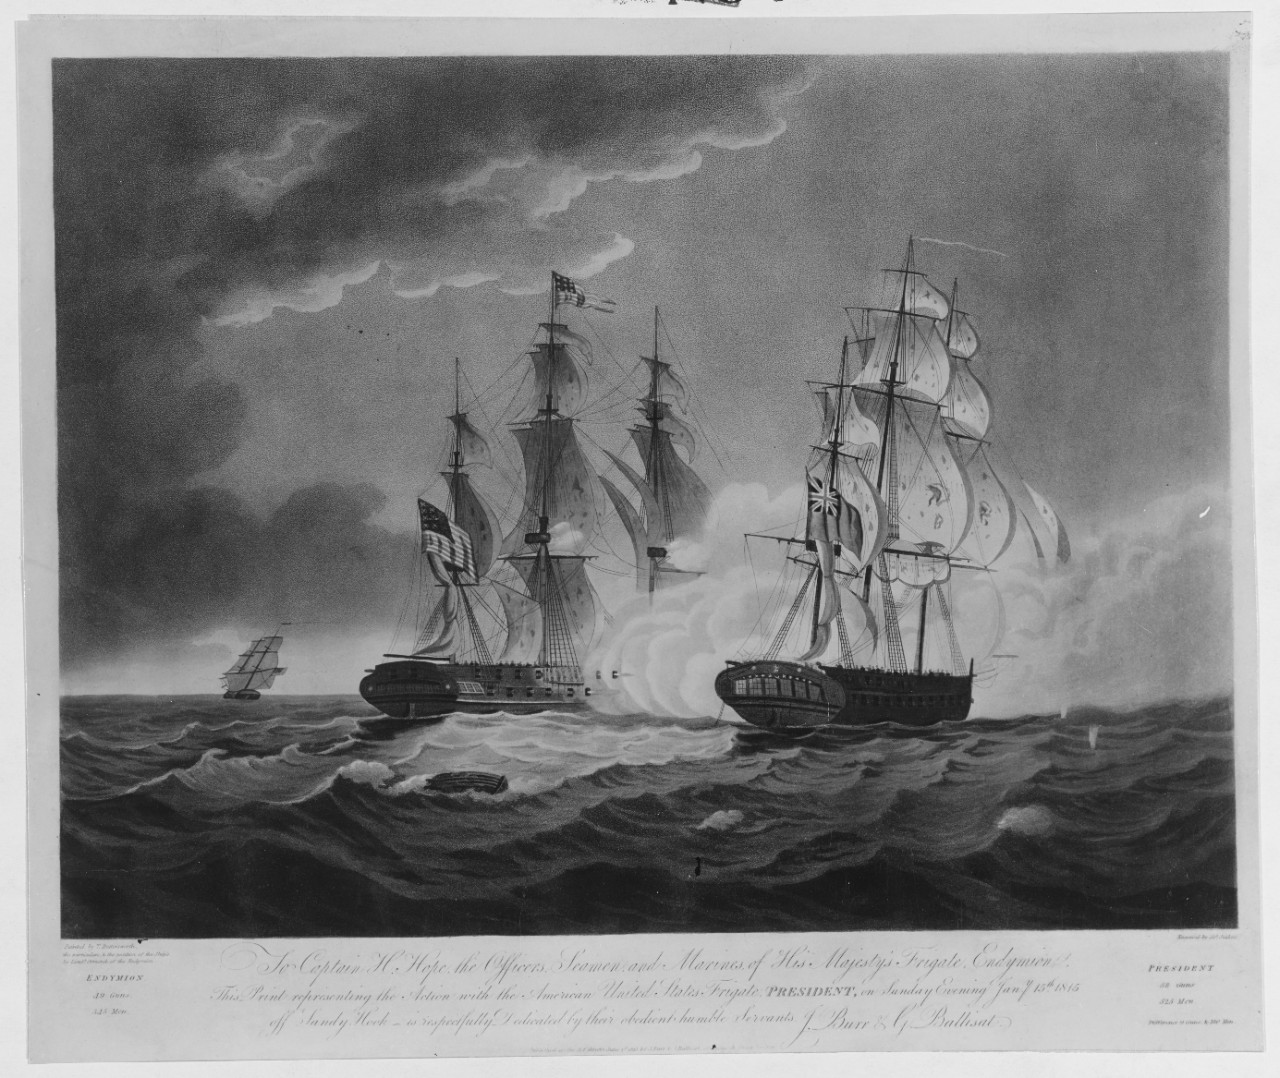 Battle between HMS ENDYMION and USS PRESIDENT, 15 January 1815